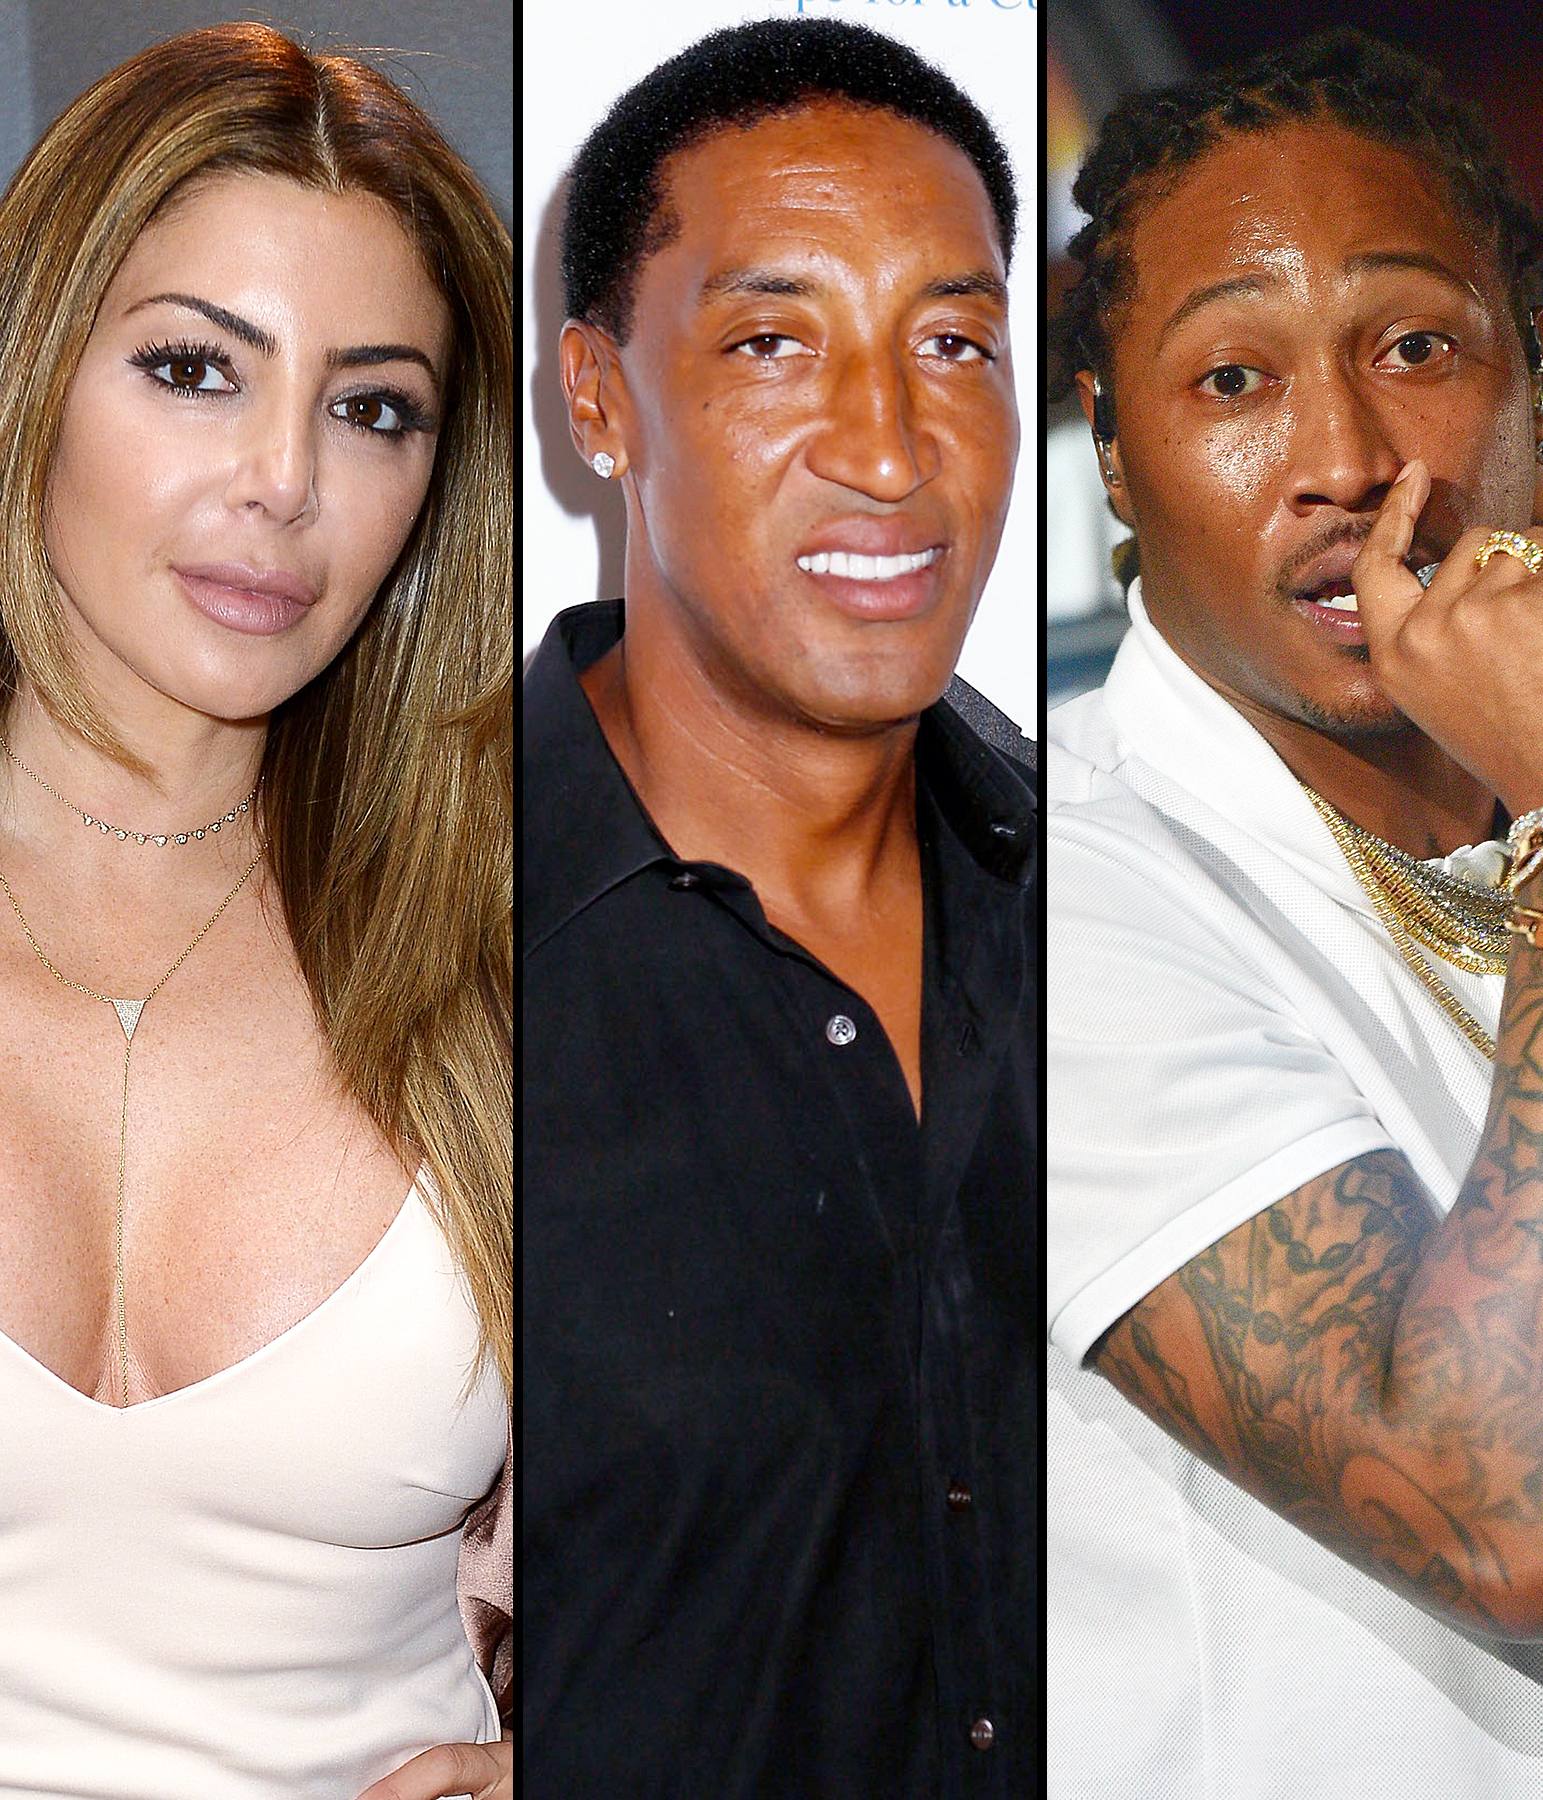 Future Reveals Why He Slept With Scottie Pippen Wife Larsa - The SportsGrail